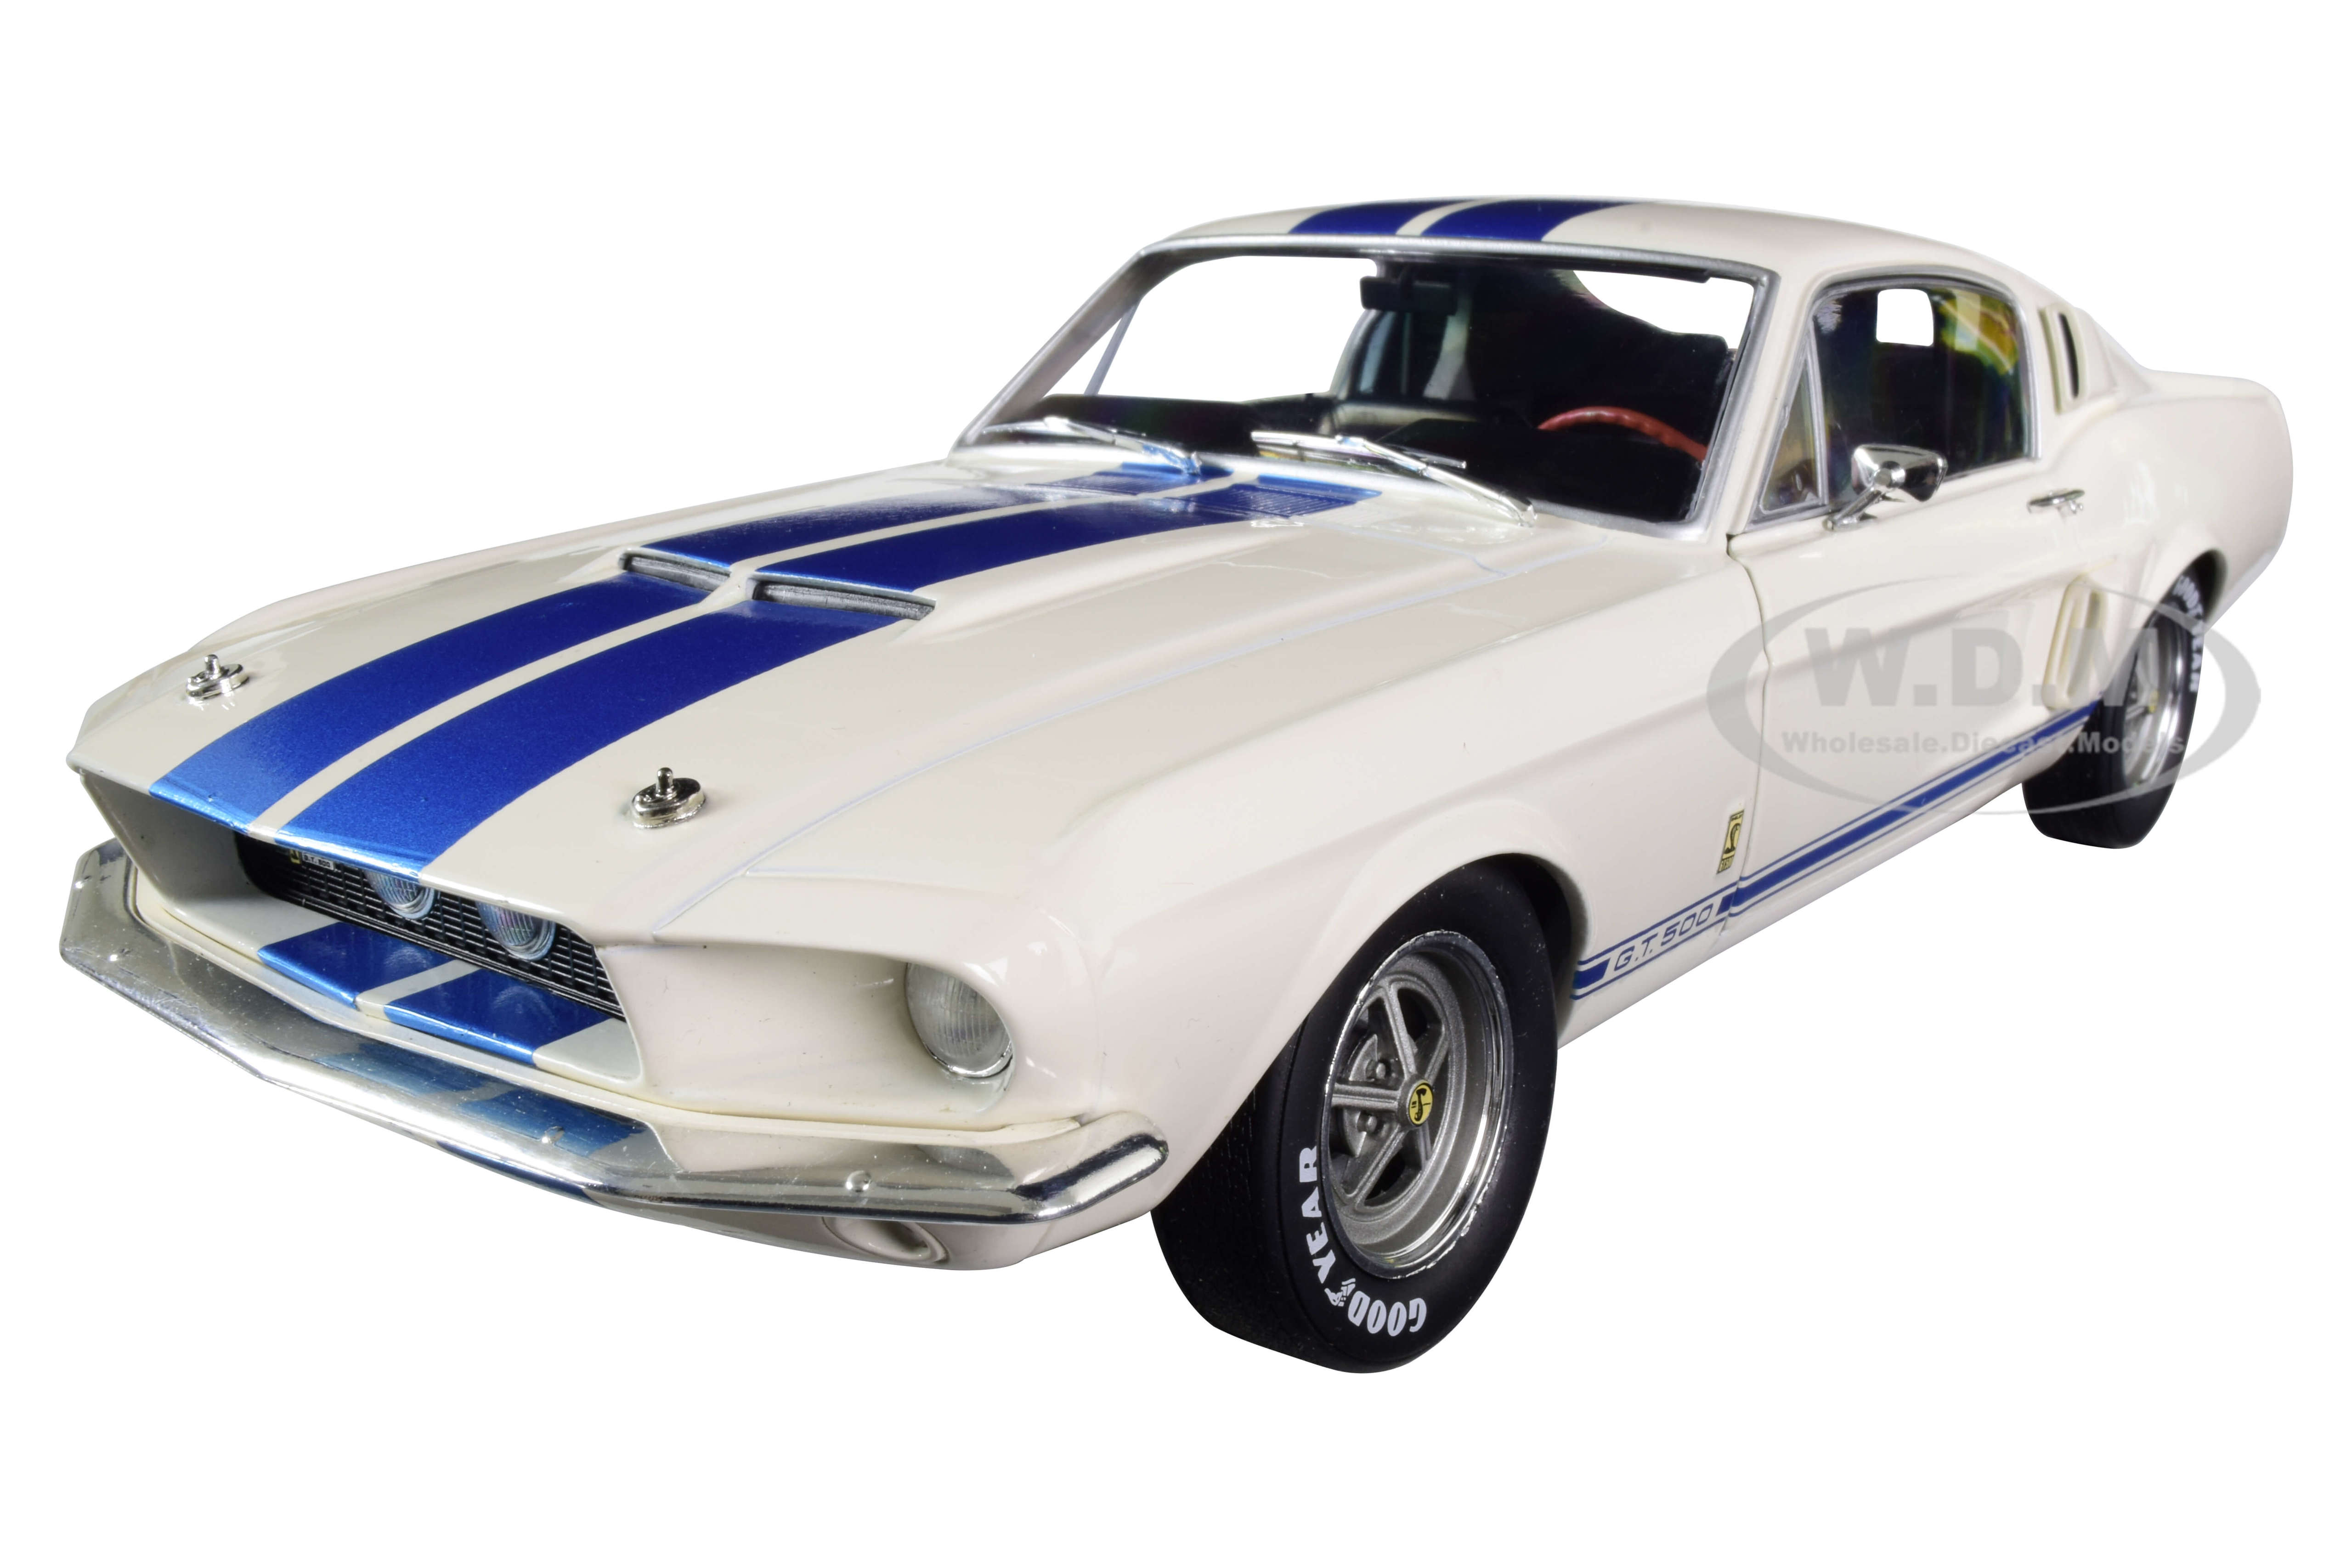 1967 Ford Mustang Shelby GT500 White with Light Blue Stripes 1/18 Diecast Model Car by Solido